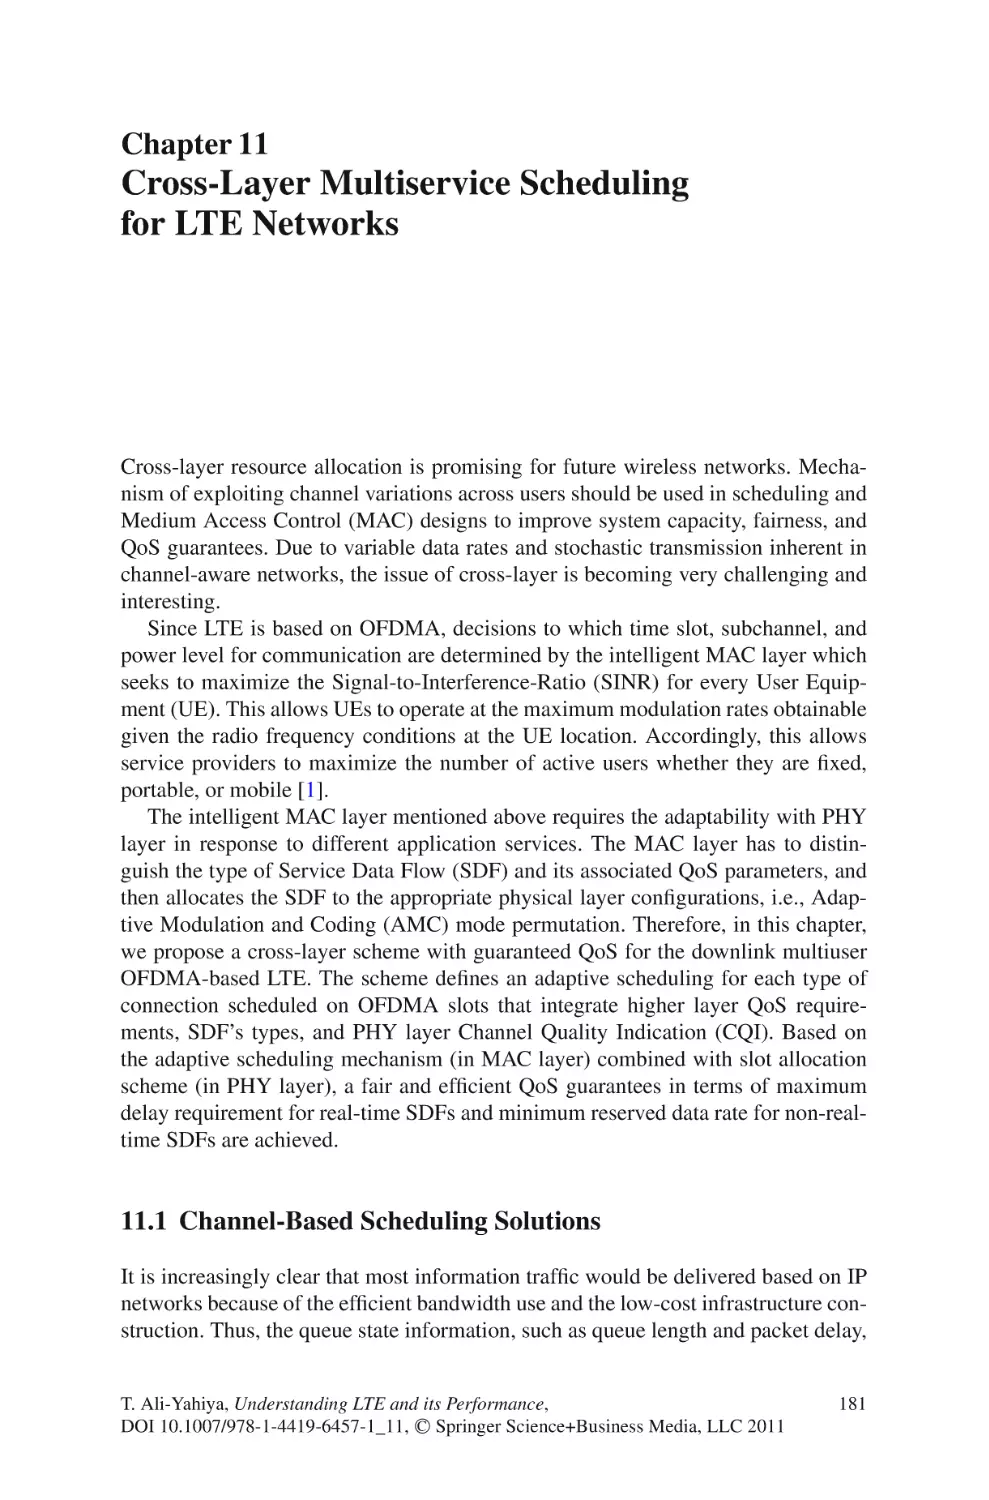 11  Cross-Layer Multiservice Scheduling for LTE Networks
11.1  Channel-Based Scheduling Solutions